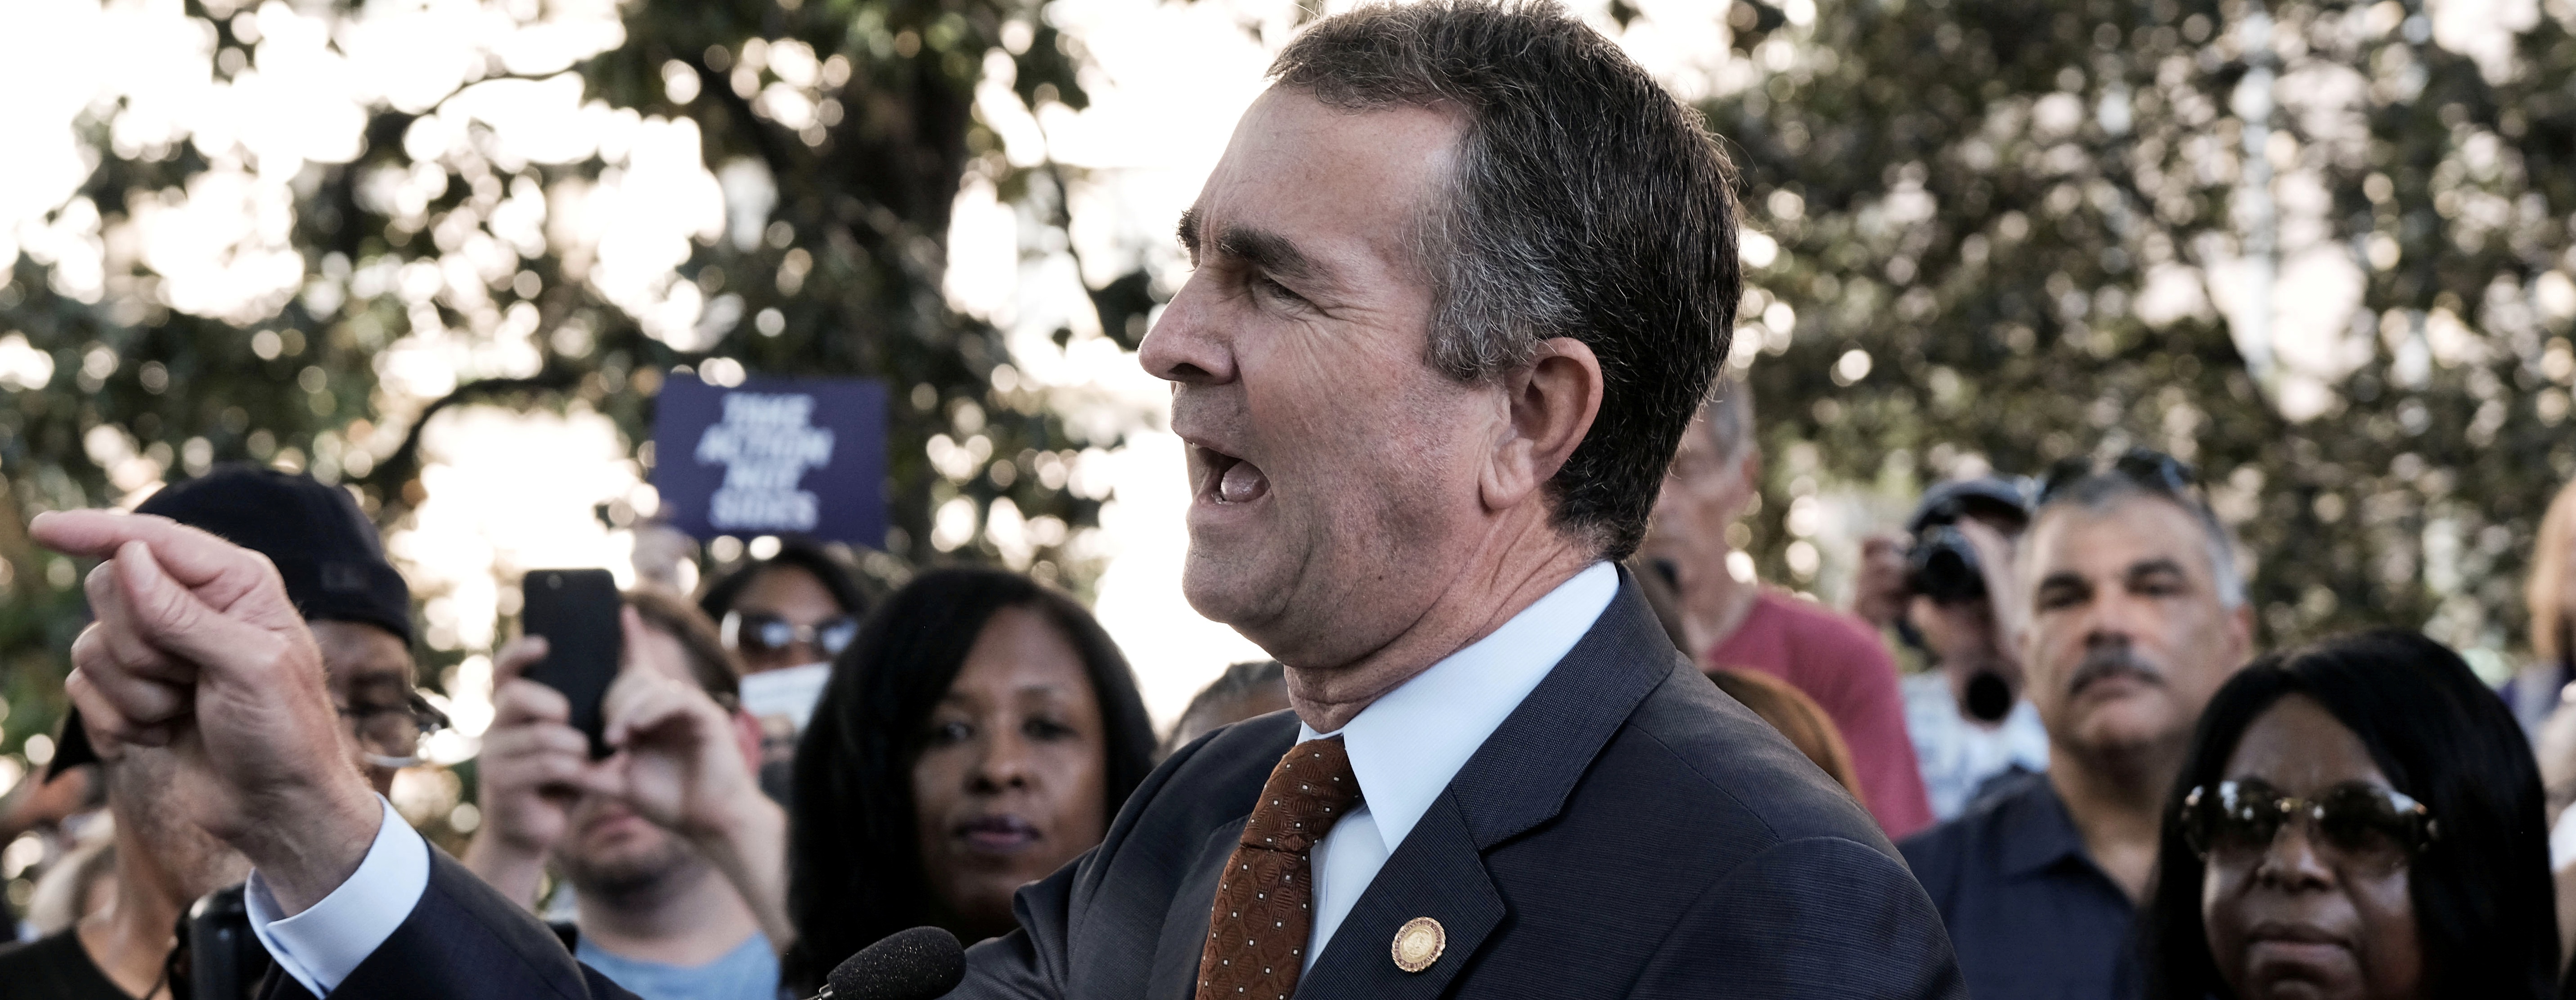 FILE PHOTO: Virginia Governor Ralph Northam speaks to gun control activists at a rally by Moms Demand Action and other family members of shooting victims outside of the Virginia State Capitol Building in Richmond, Virginia, U.S. July 9, 2019. REUTERS/Michael A. McCoy/File Photo